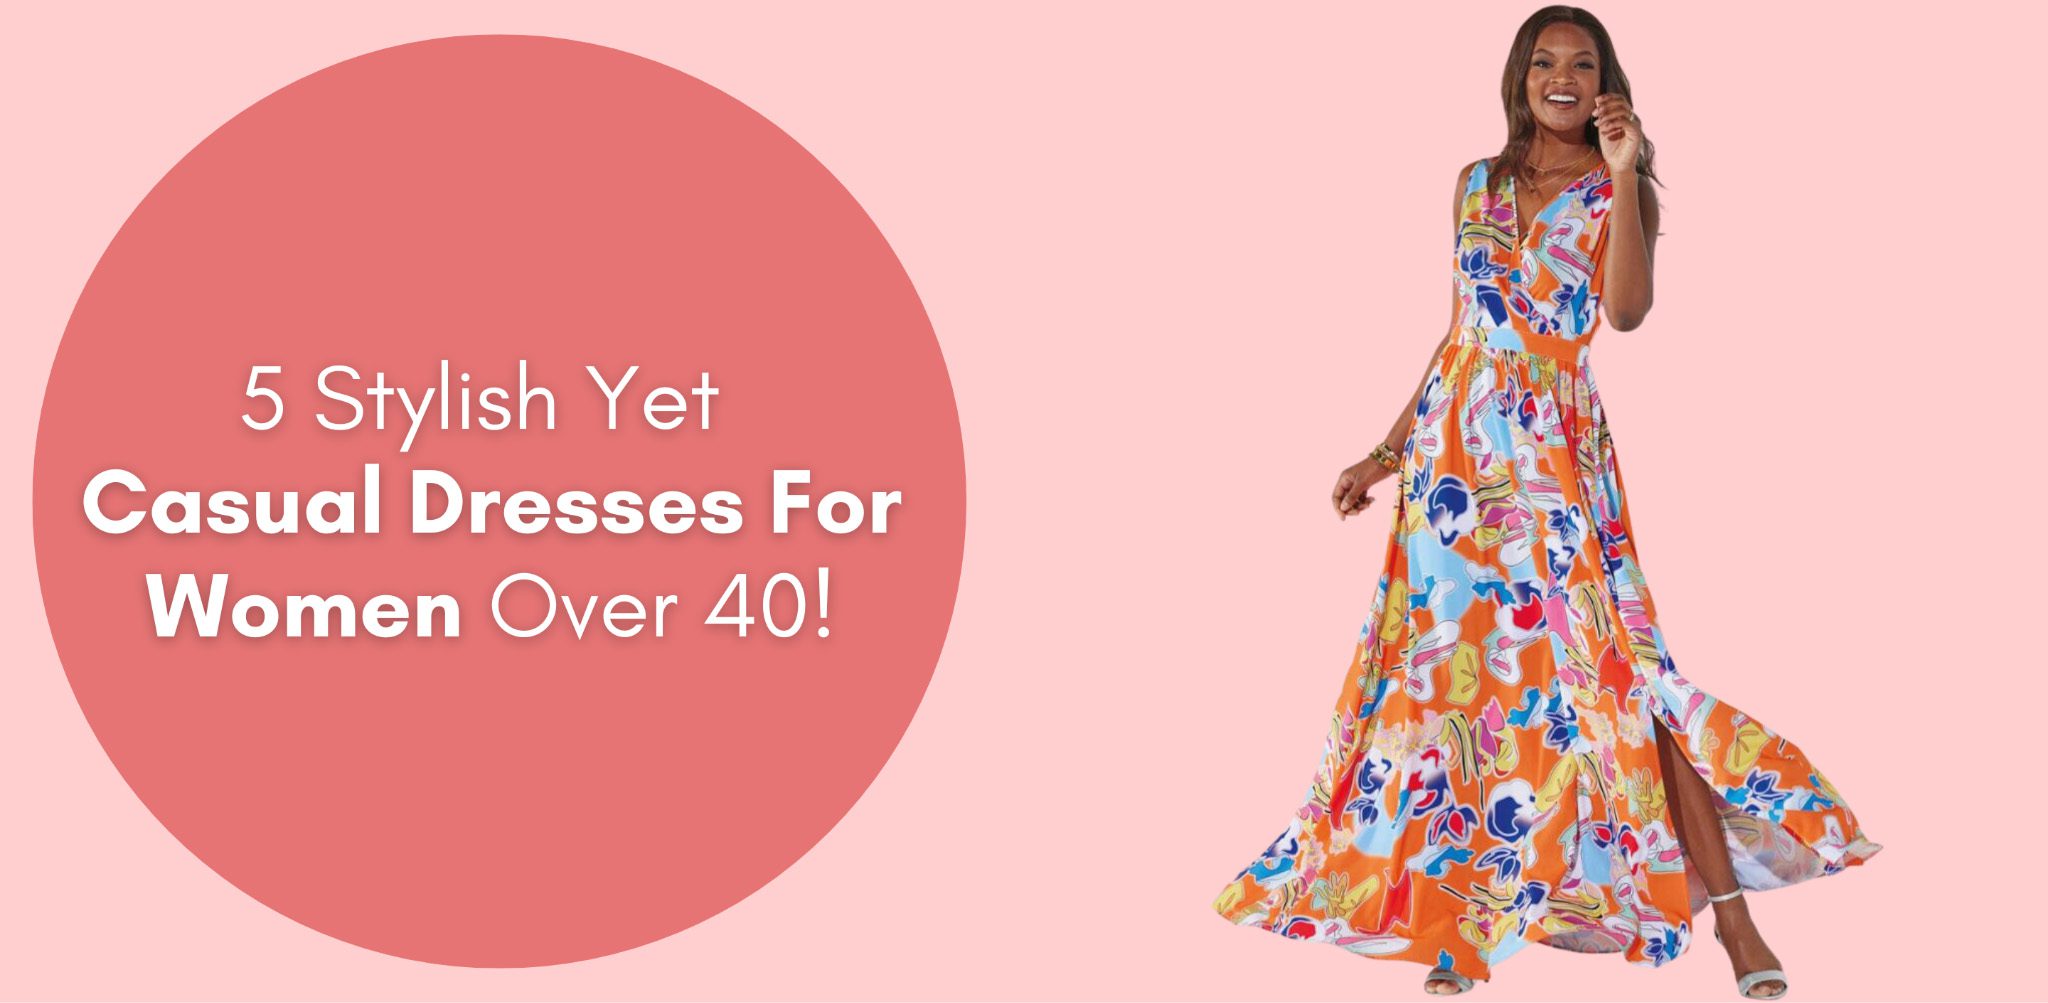 5 Stylish Yet Casual Dresses For Women Over 40!